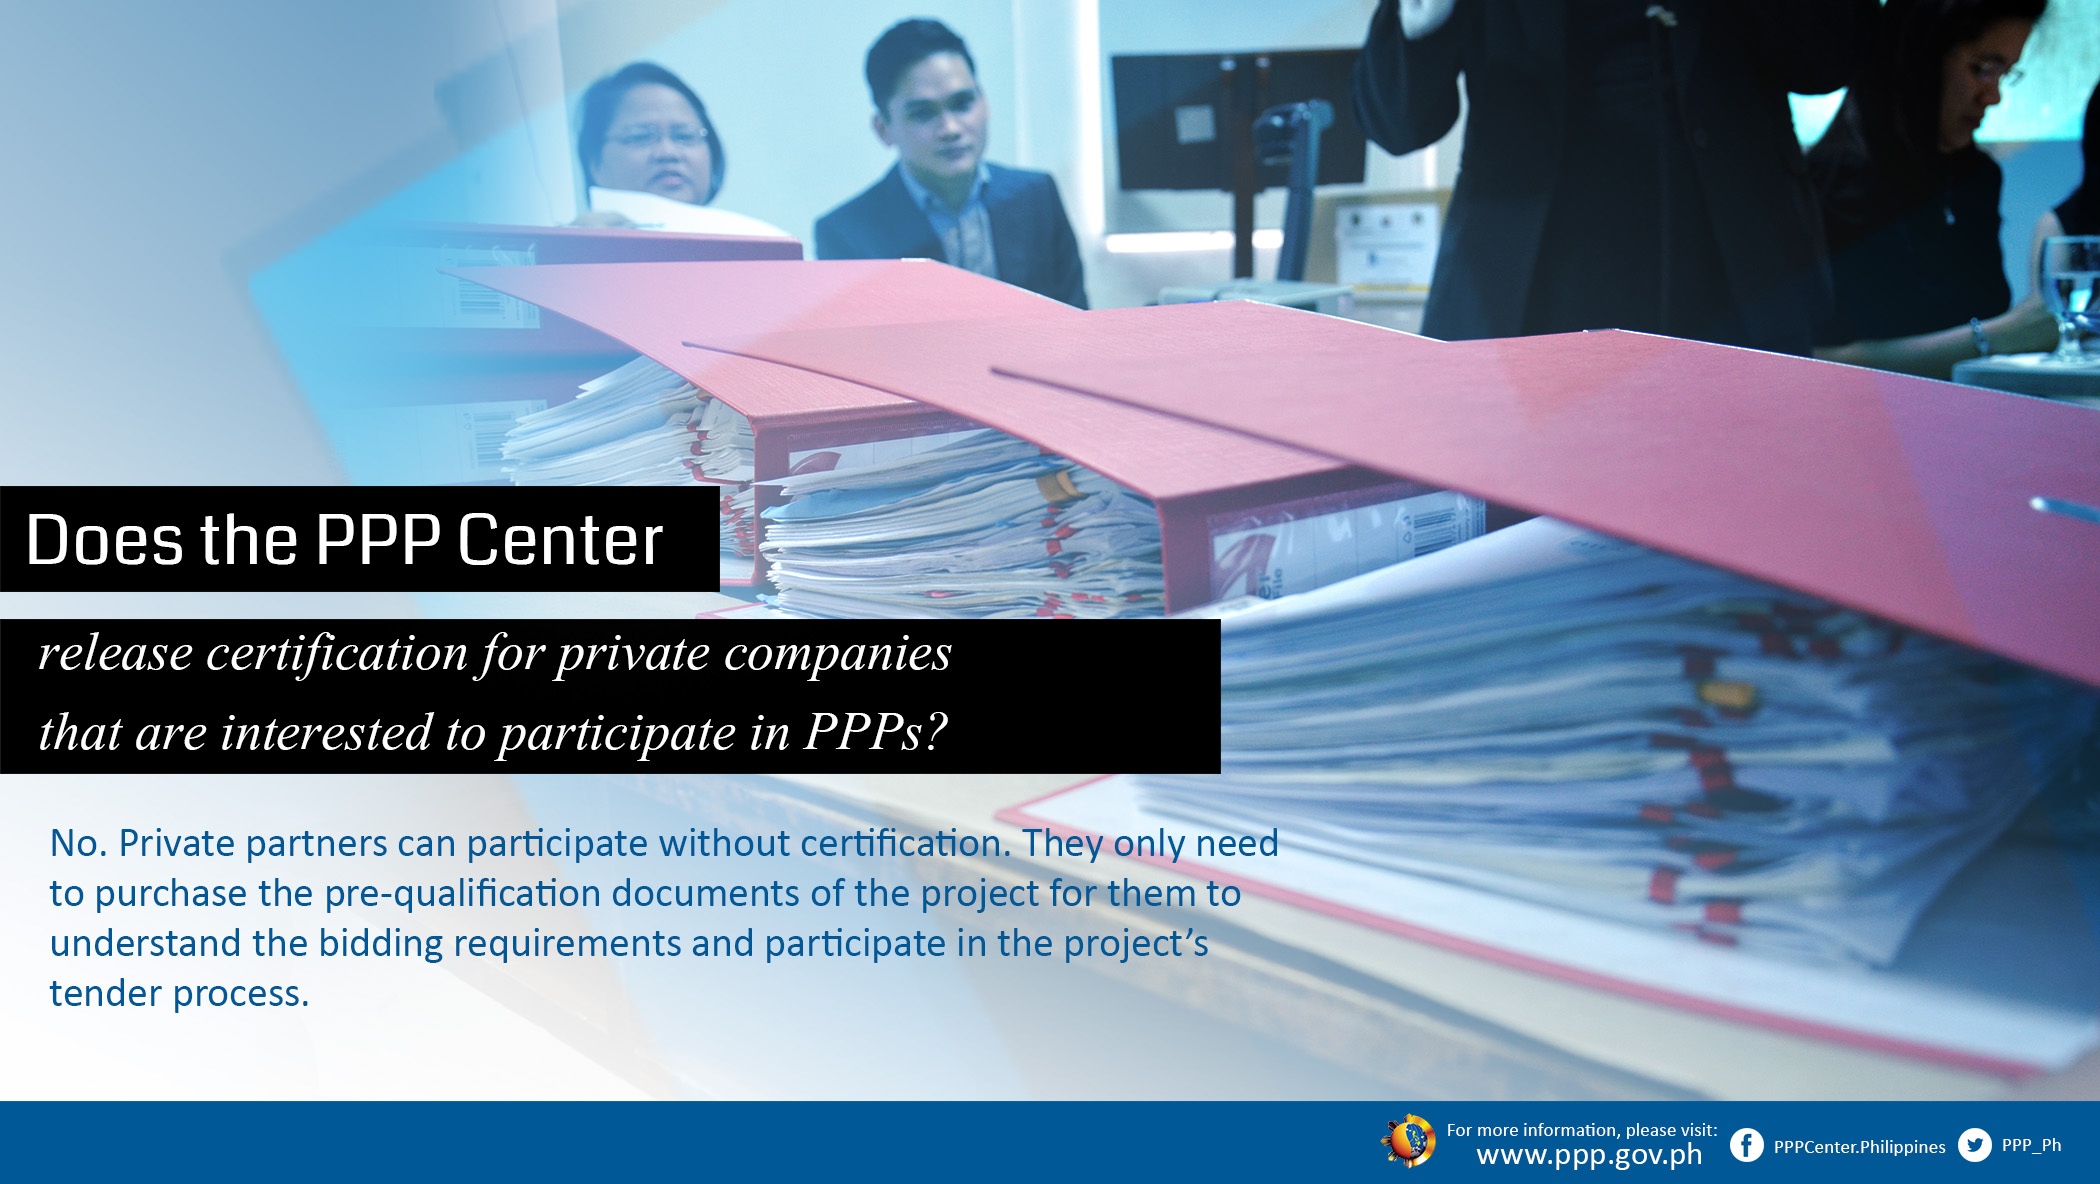 Does the PPP Center release certification for private companies that are interested to participate in PPPs?